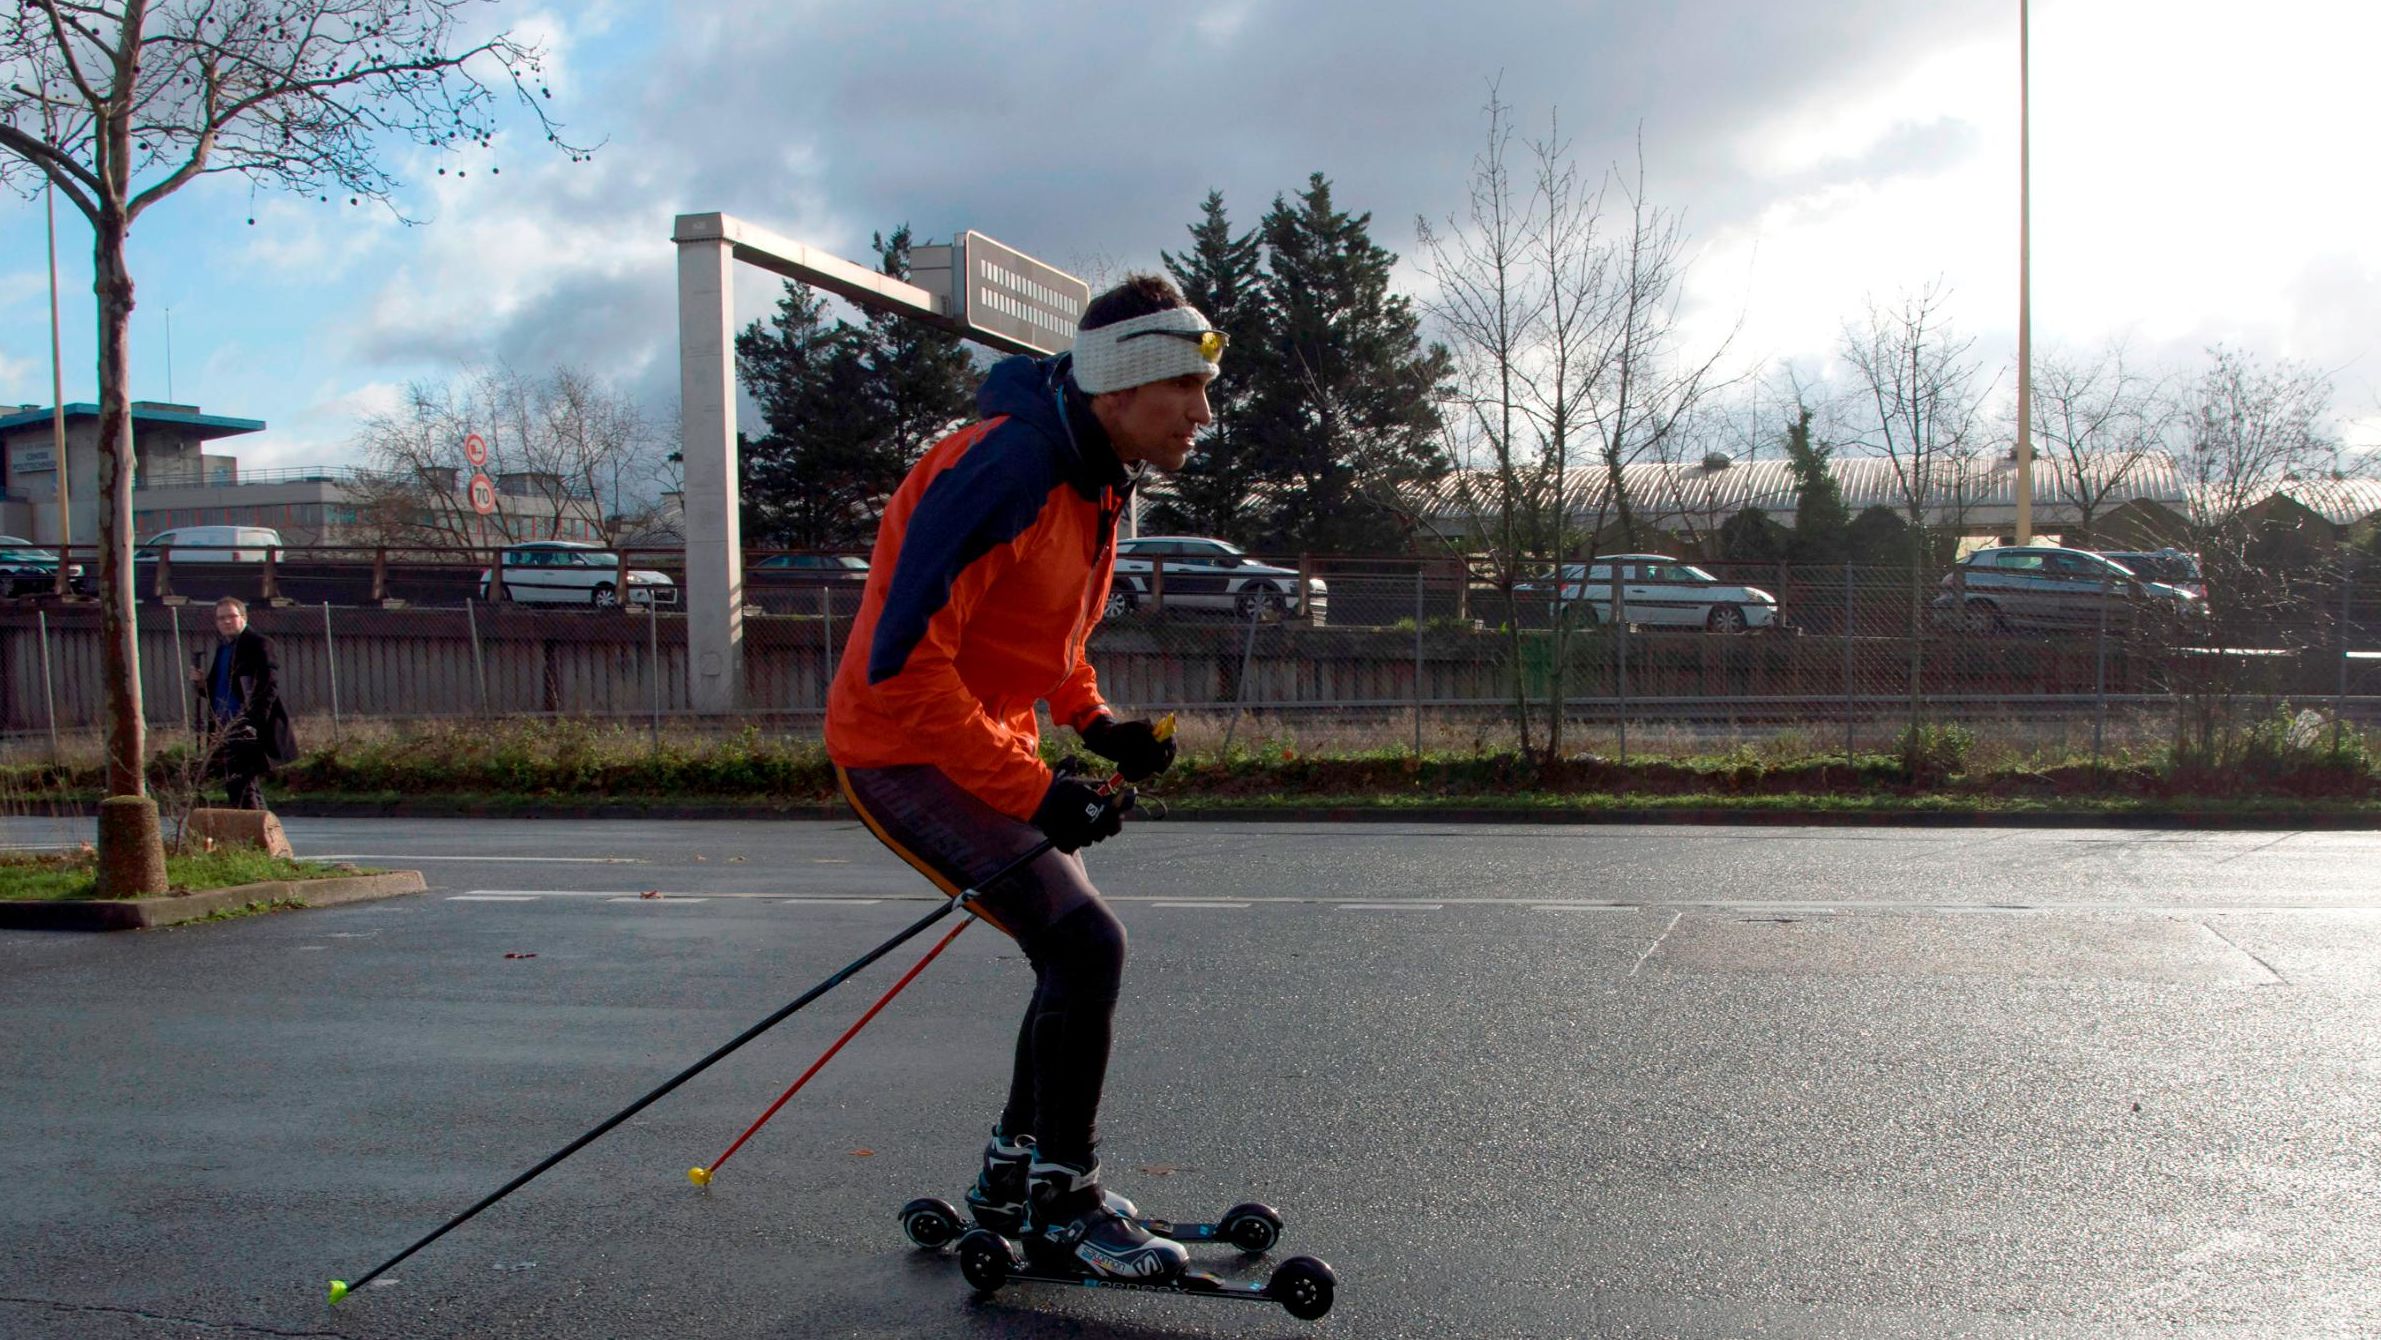 Morocco's Azzimani trains on roller skis